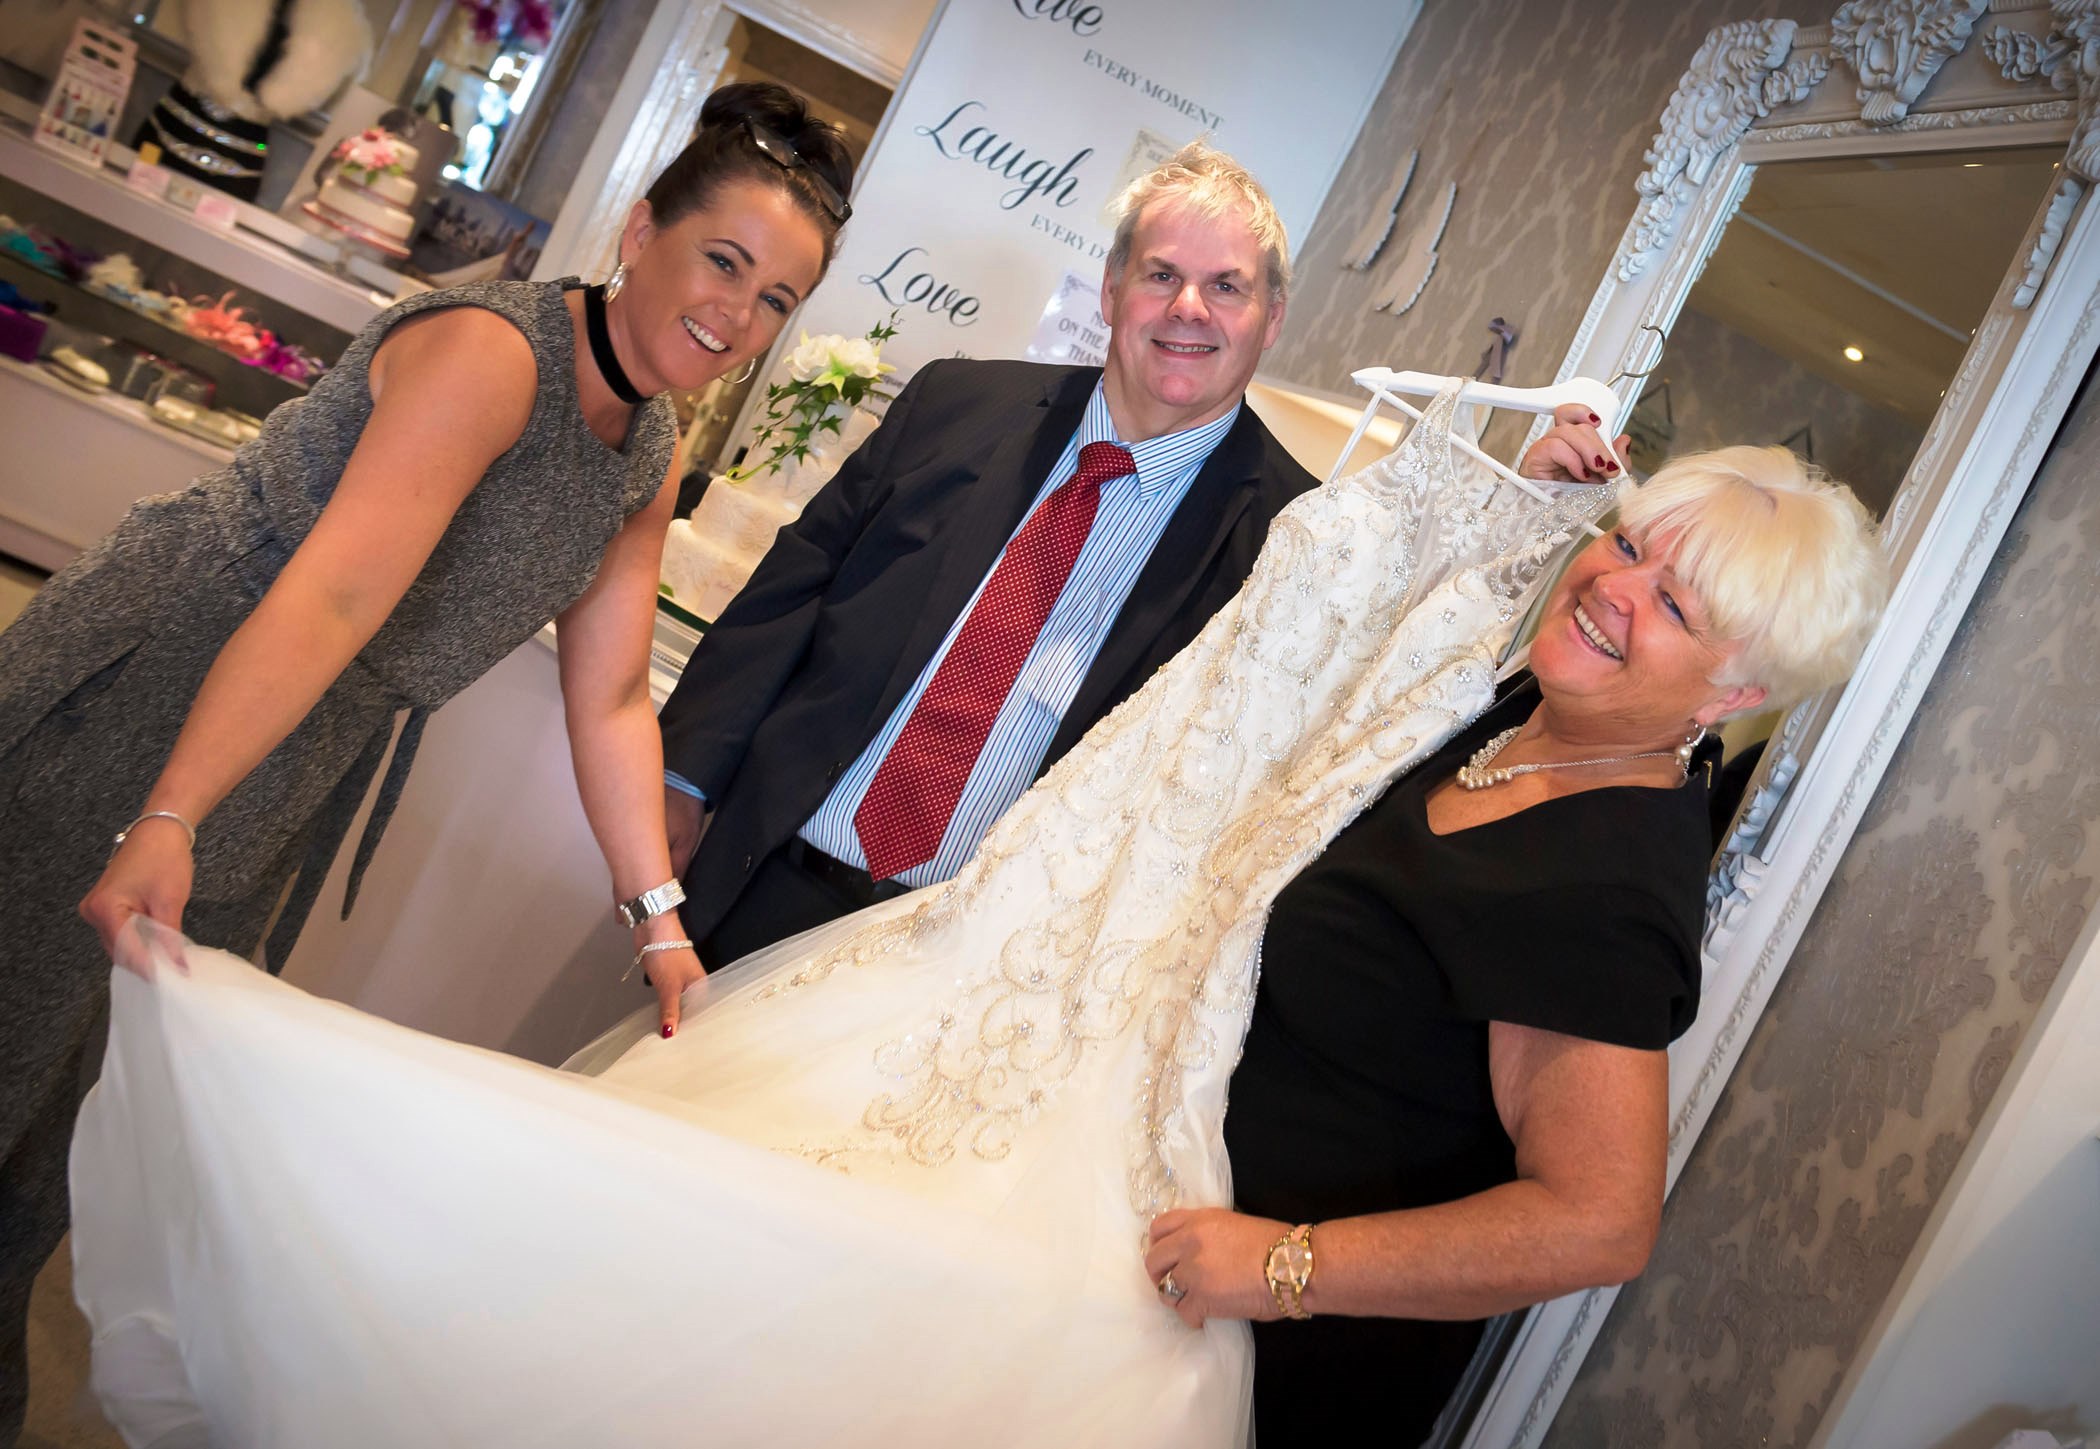 Image: Heywood bridal boutique says ‘I do’ to council’s business rates sale